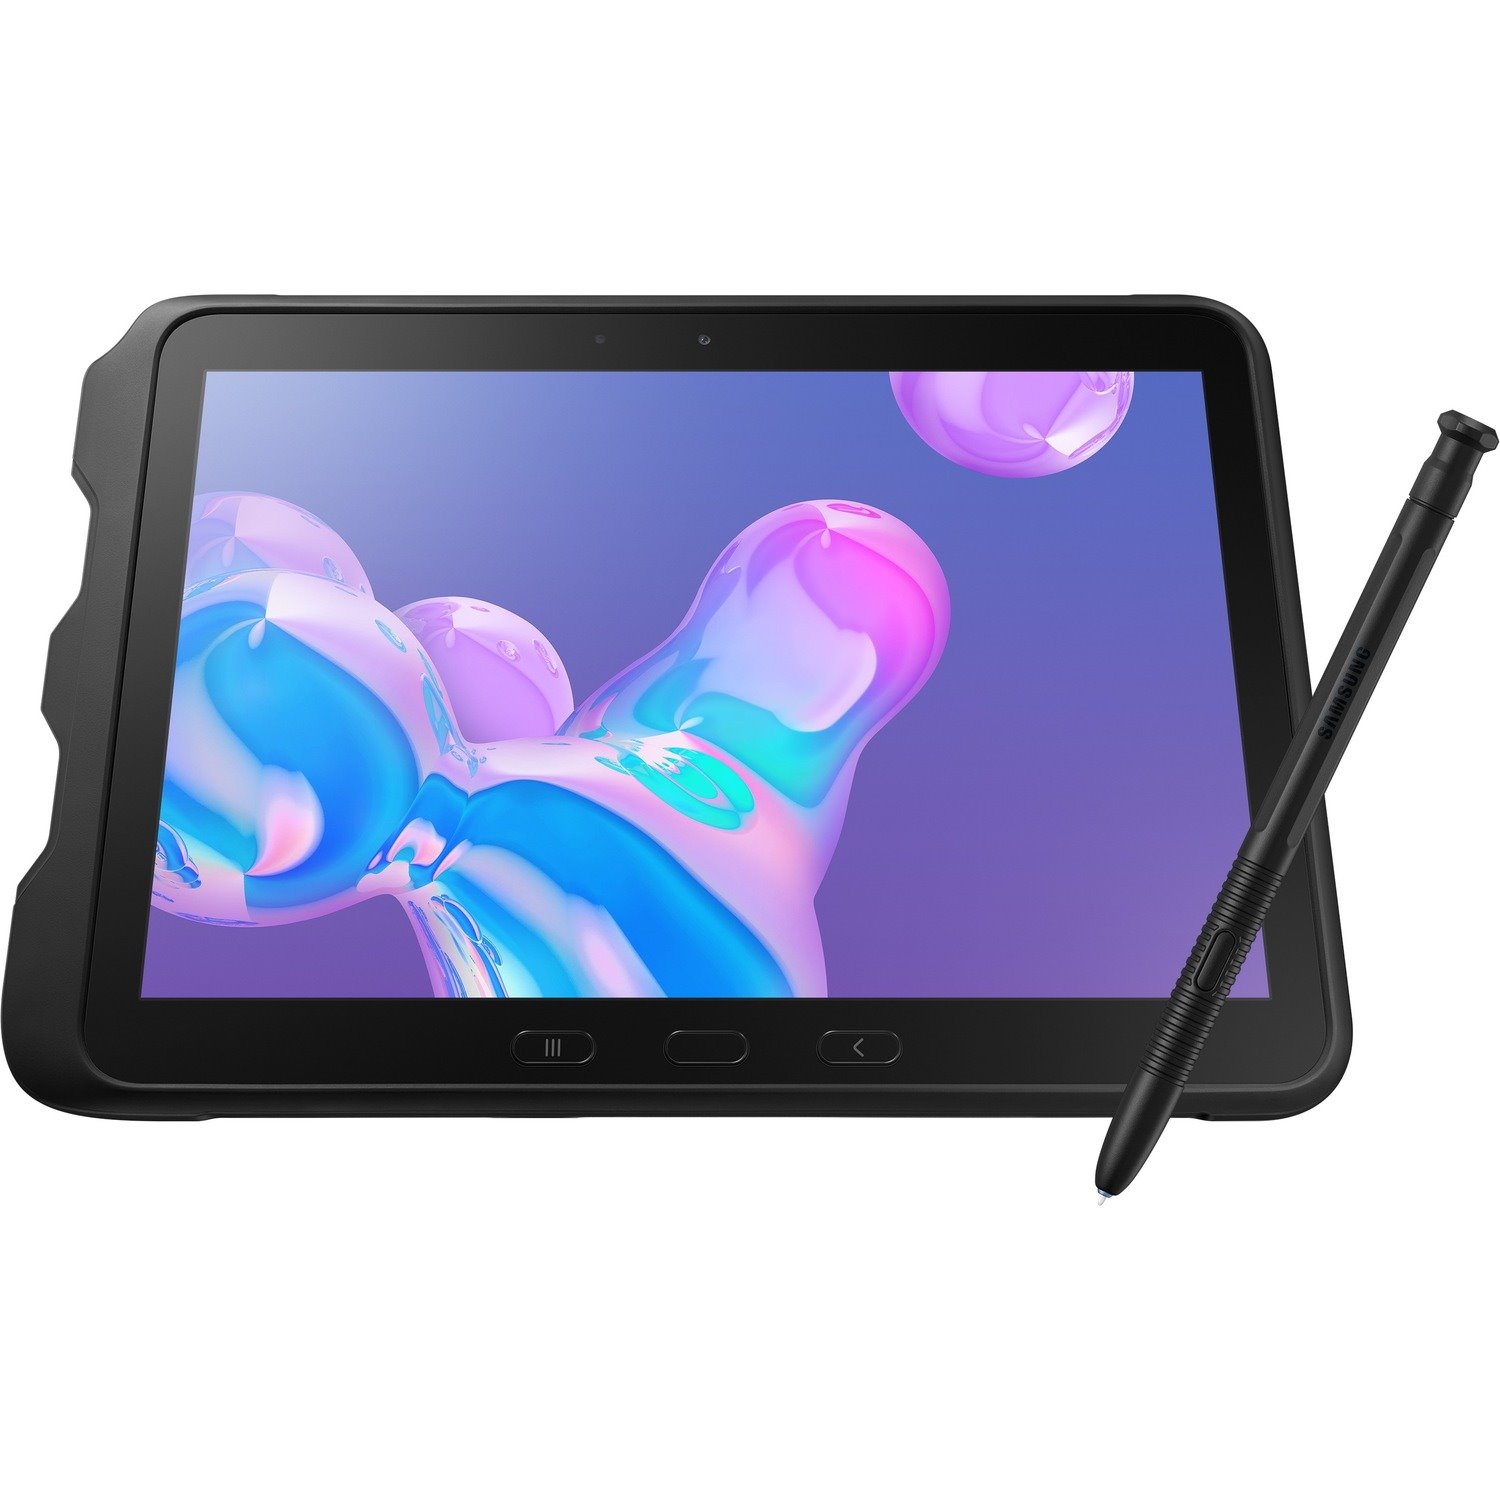 Samsung Galaxy Tab Active Pro SM-T547 Tablet - 10.1" - Dual-core (2 Core) 2 GHz Hexa-core (6 Core) 1.70 GHz - 4 GB RAM - 64 GB Storage - Android 9.0 Pie - 4G - Black